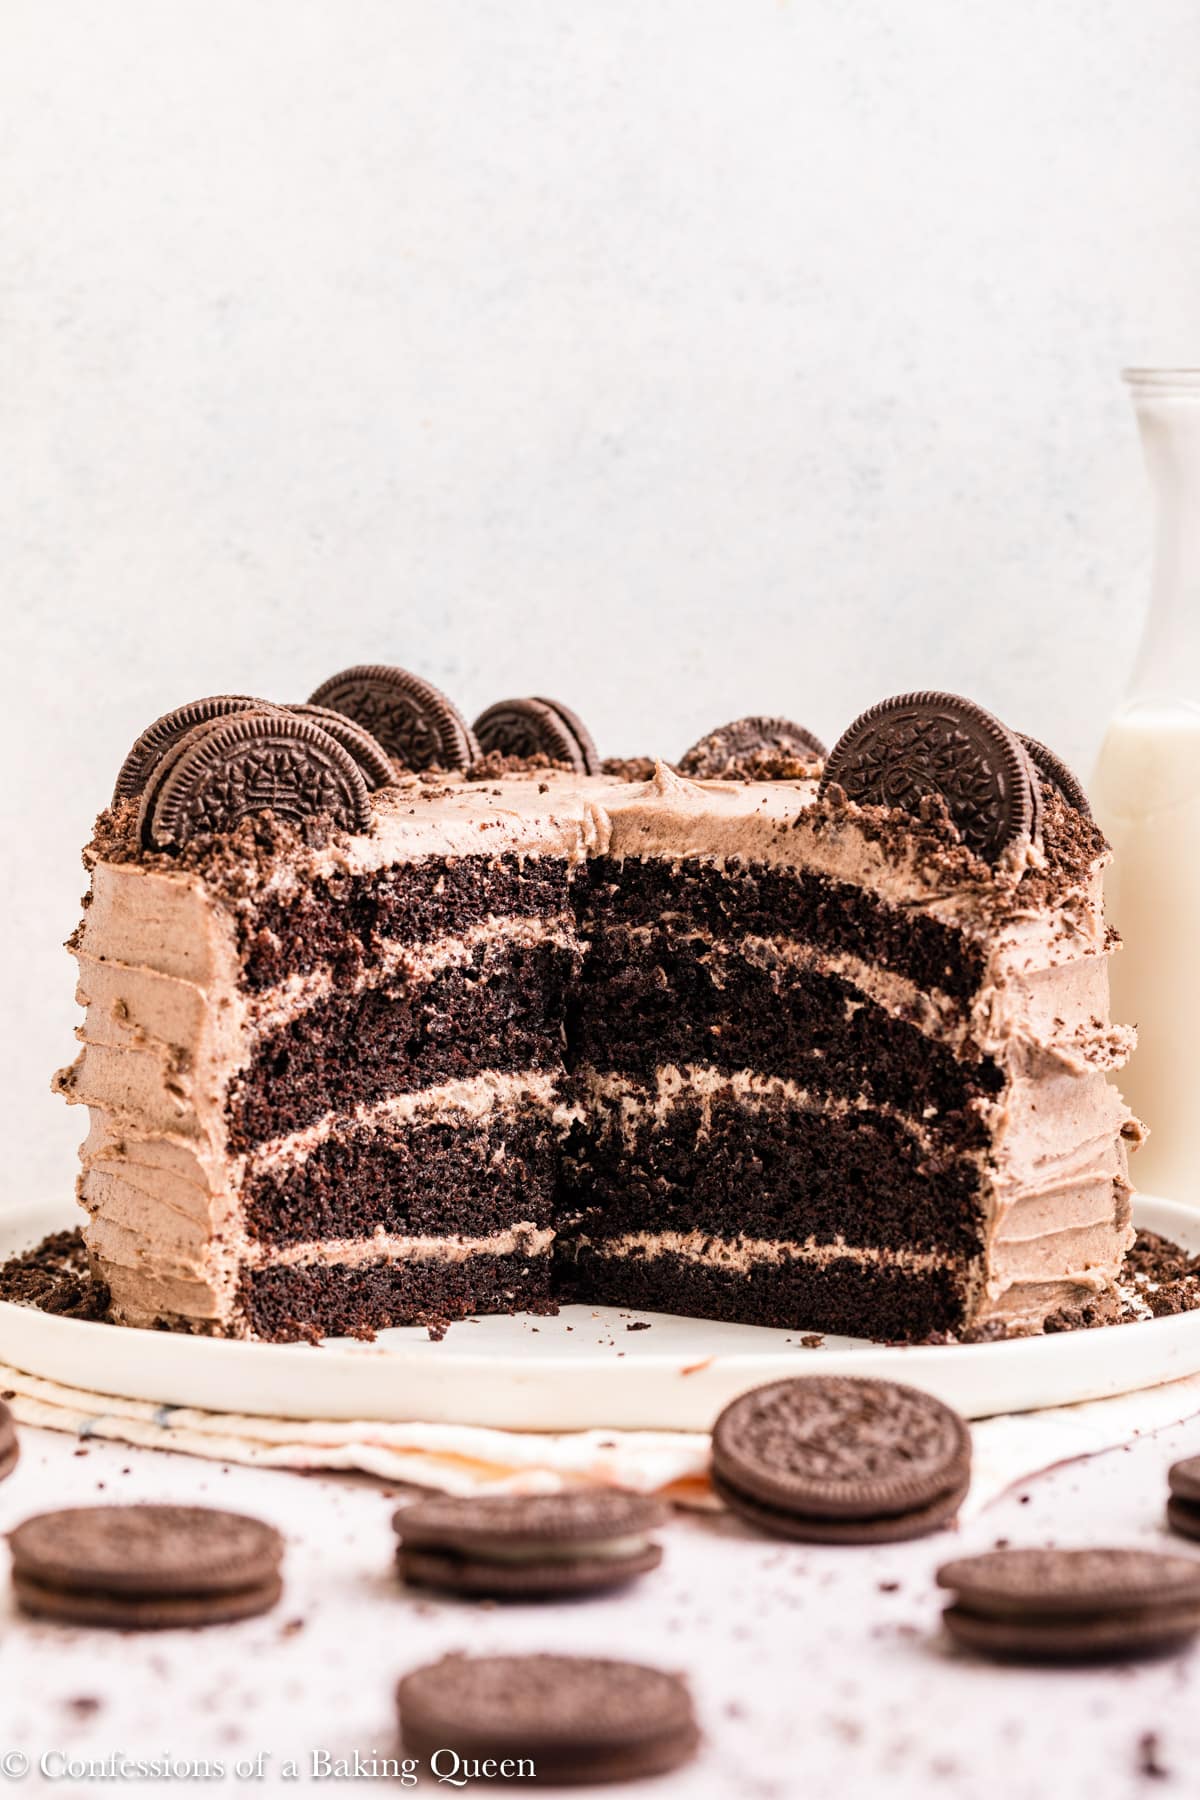 Oreo cake on a serving platter with a large slice or two taken out of it surrounded by Oreos.